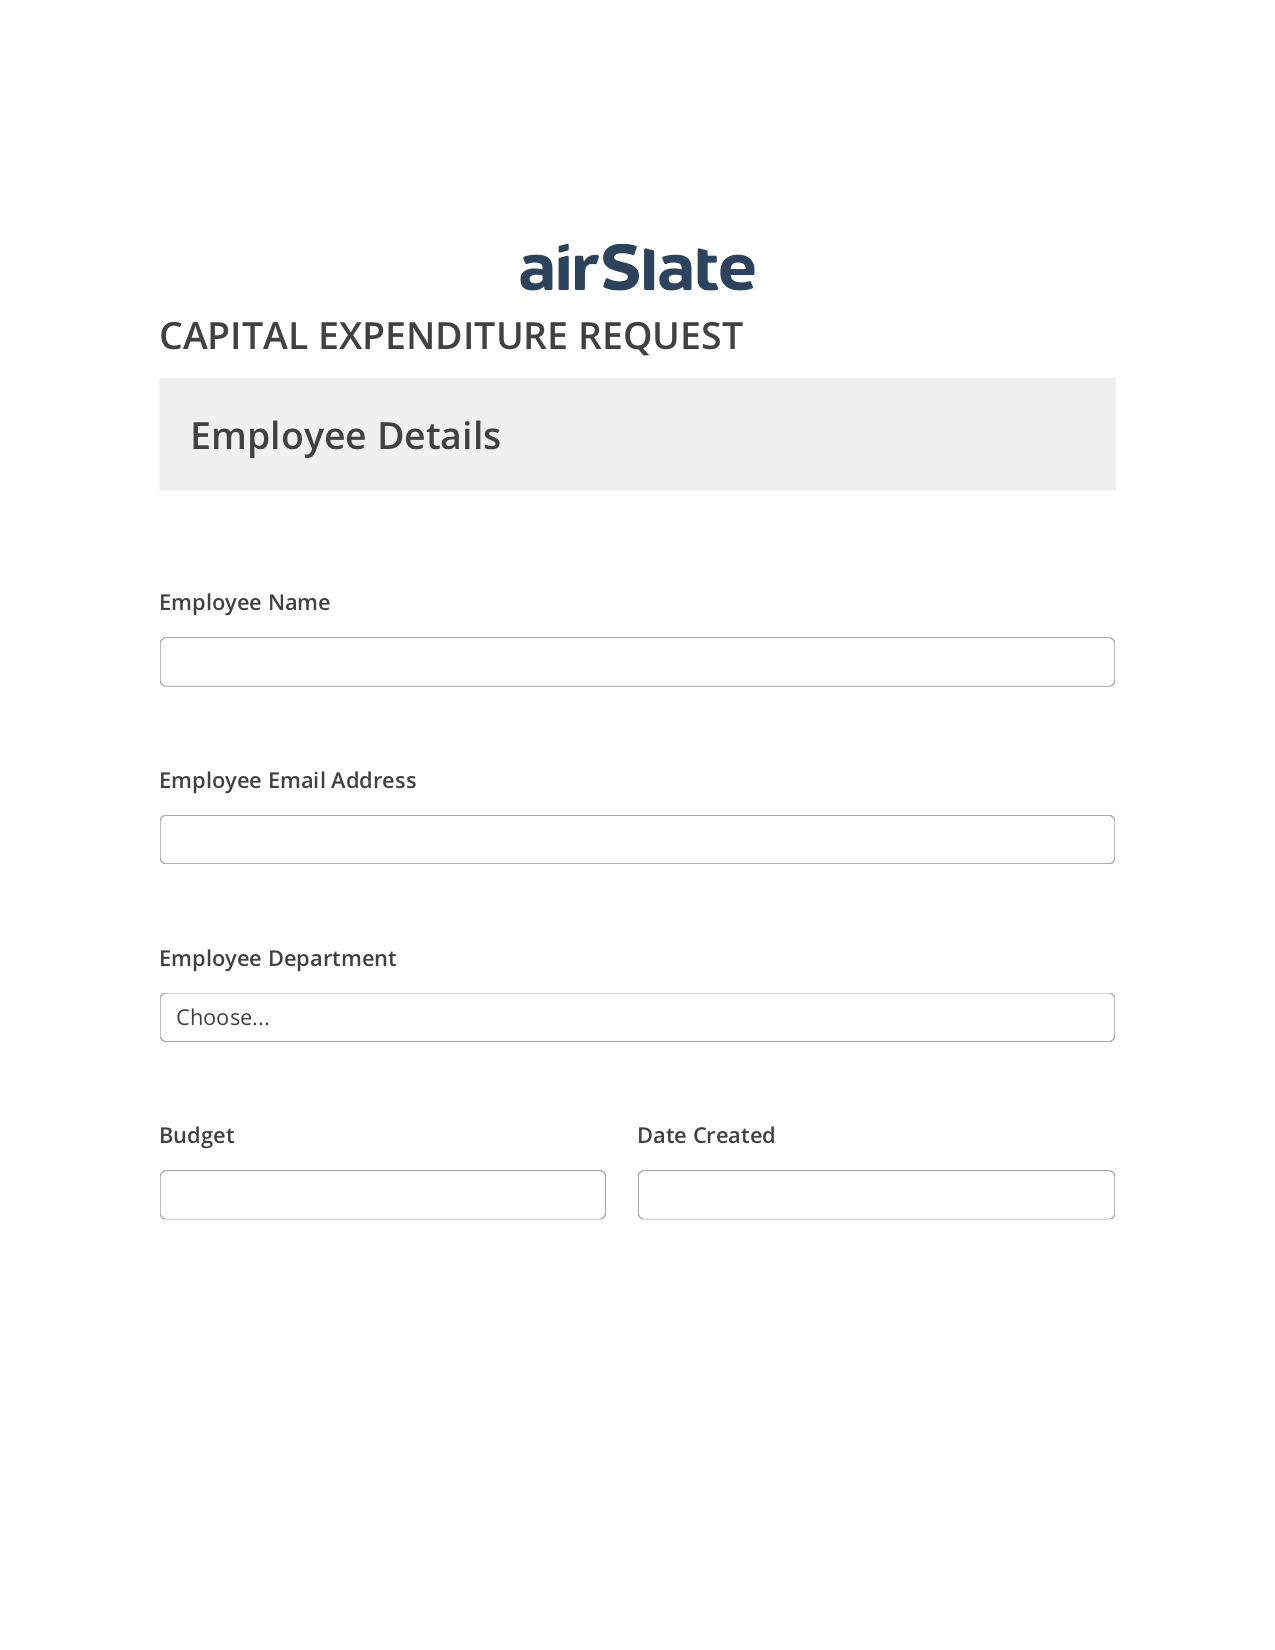 Capital Expenditure Request Approval Workflow Pre-fill Dropdown from Airtable, Create Salesforce Record Bot, Export to Smartsheet